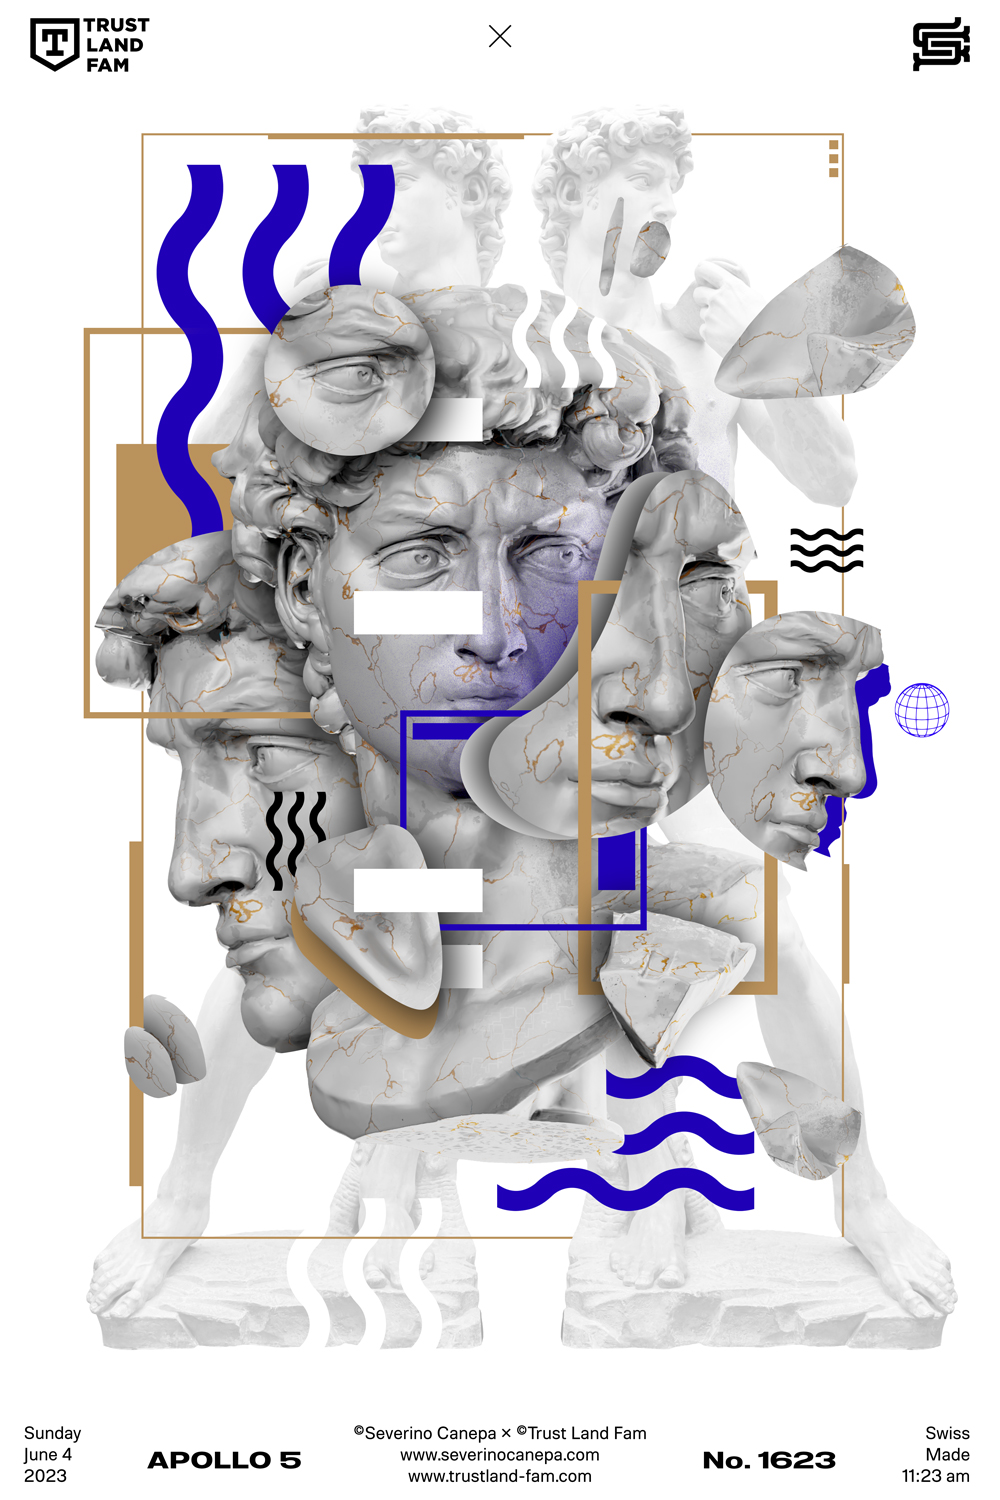 Dreamlike artwork using AI-generated images of David's Statue and geometric shapes